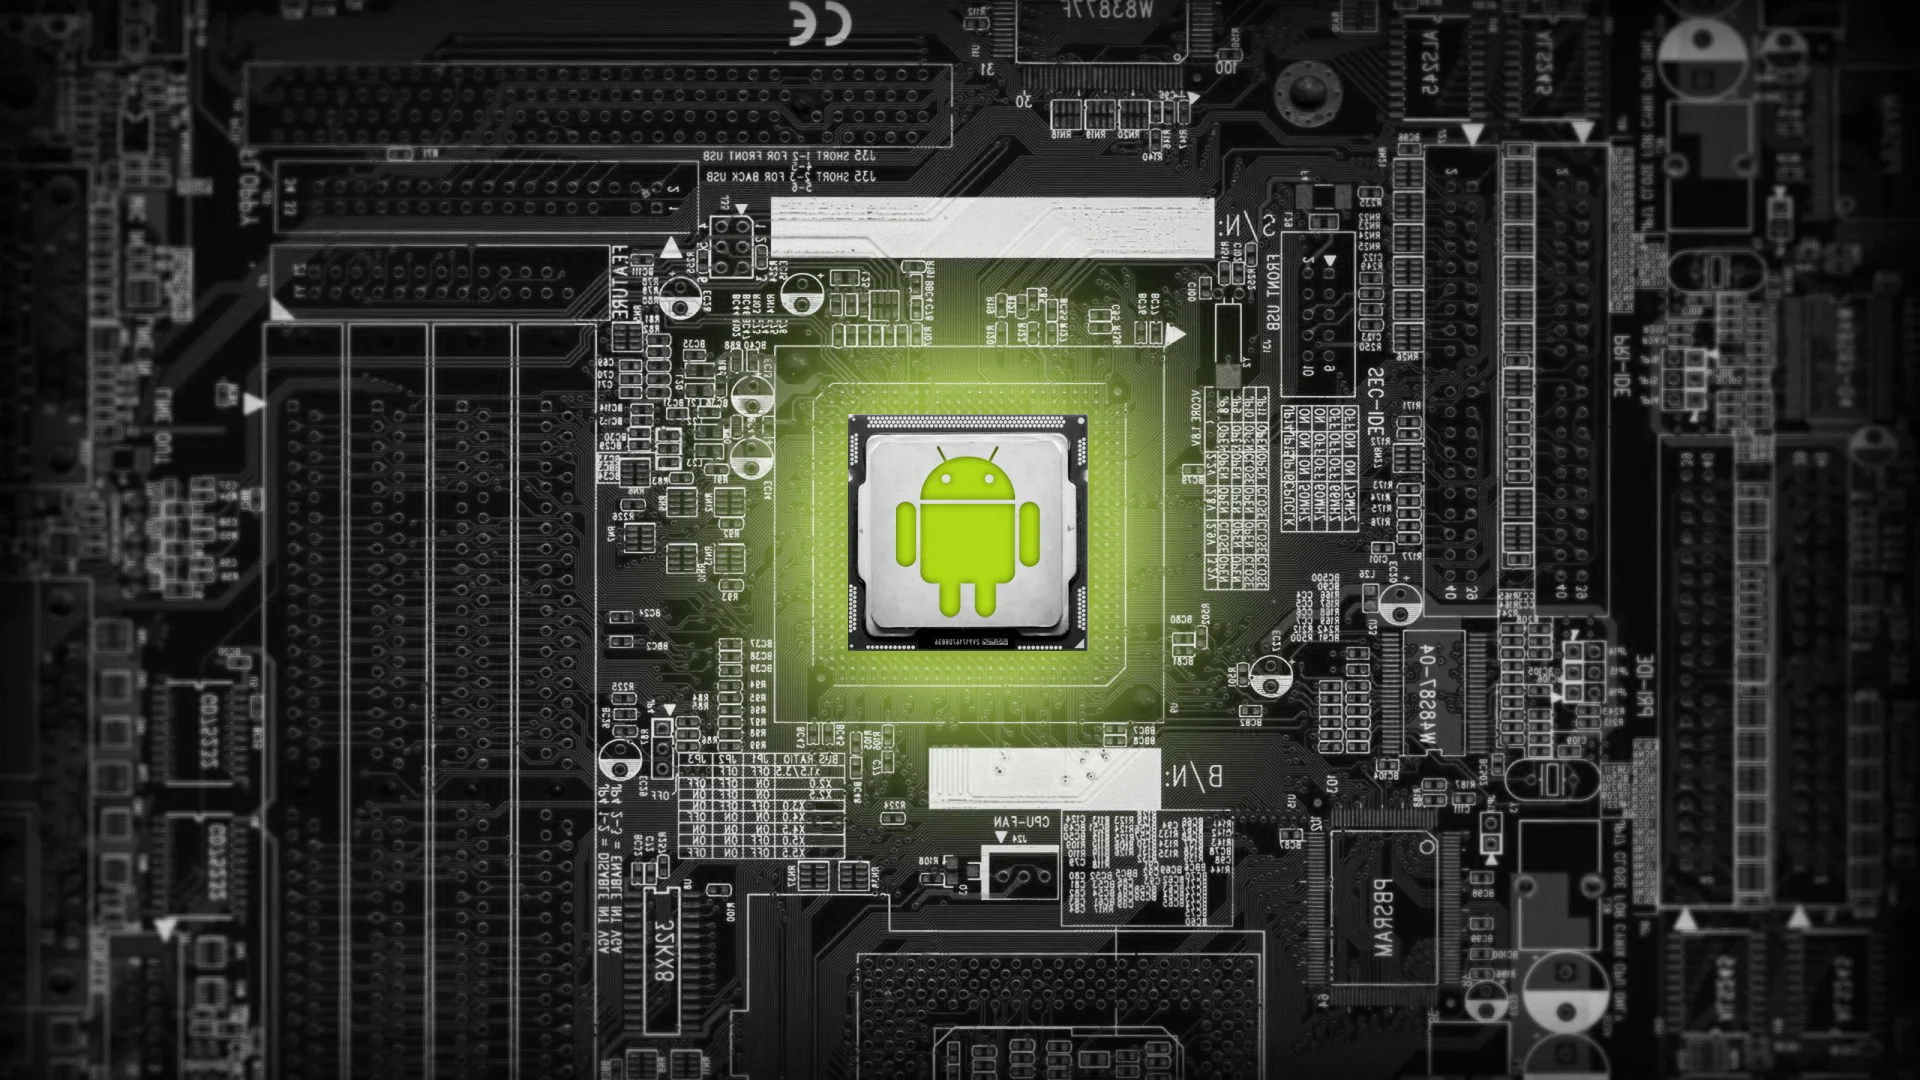 The blogger tested the flagship smartphone processors on Android